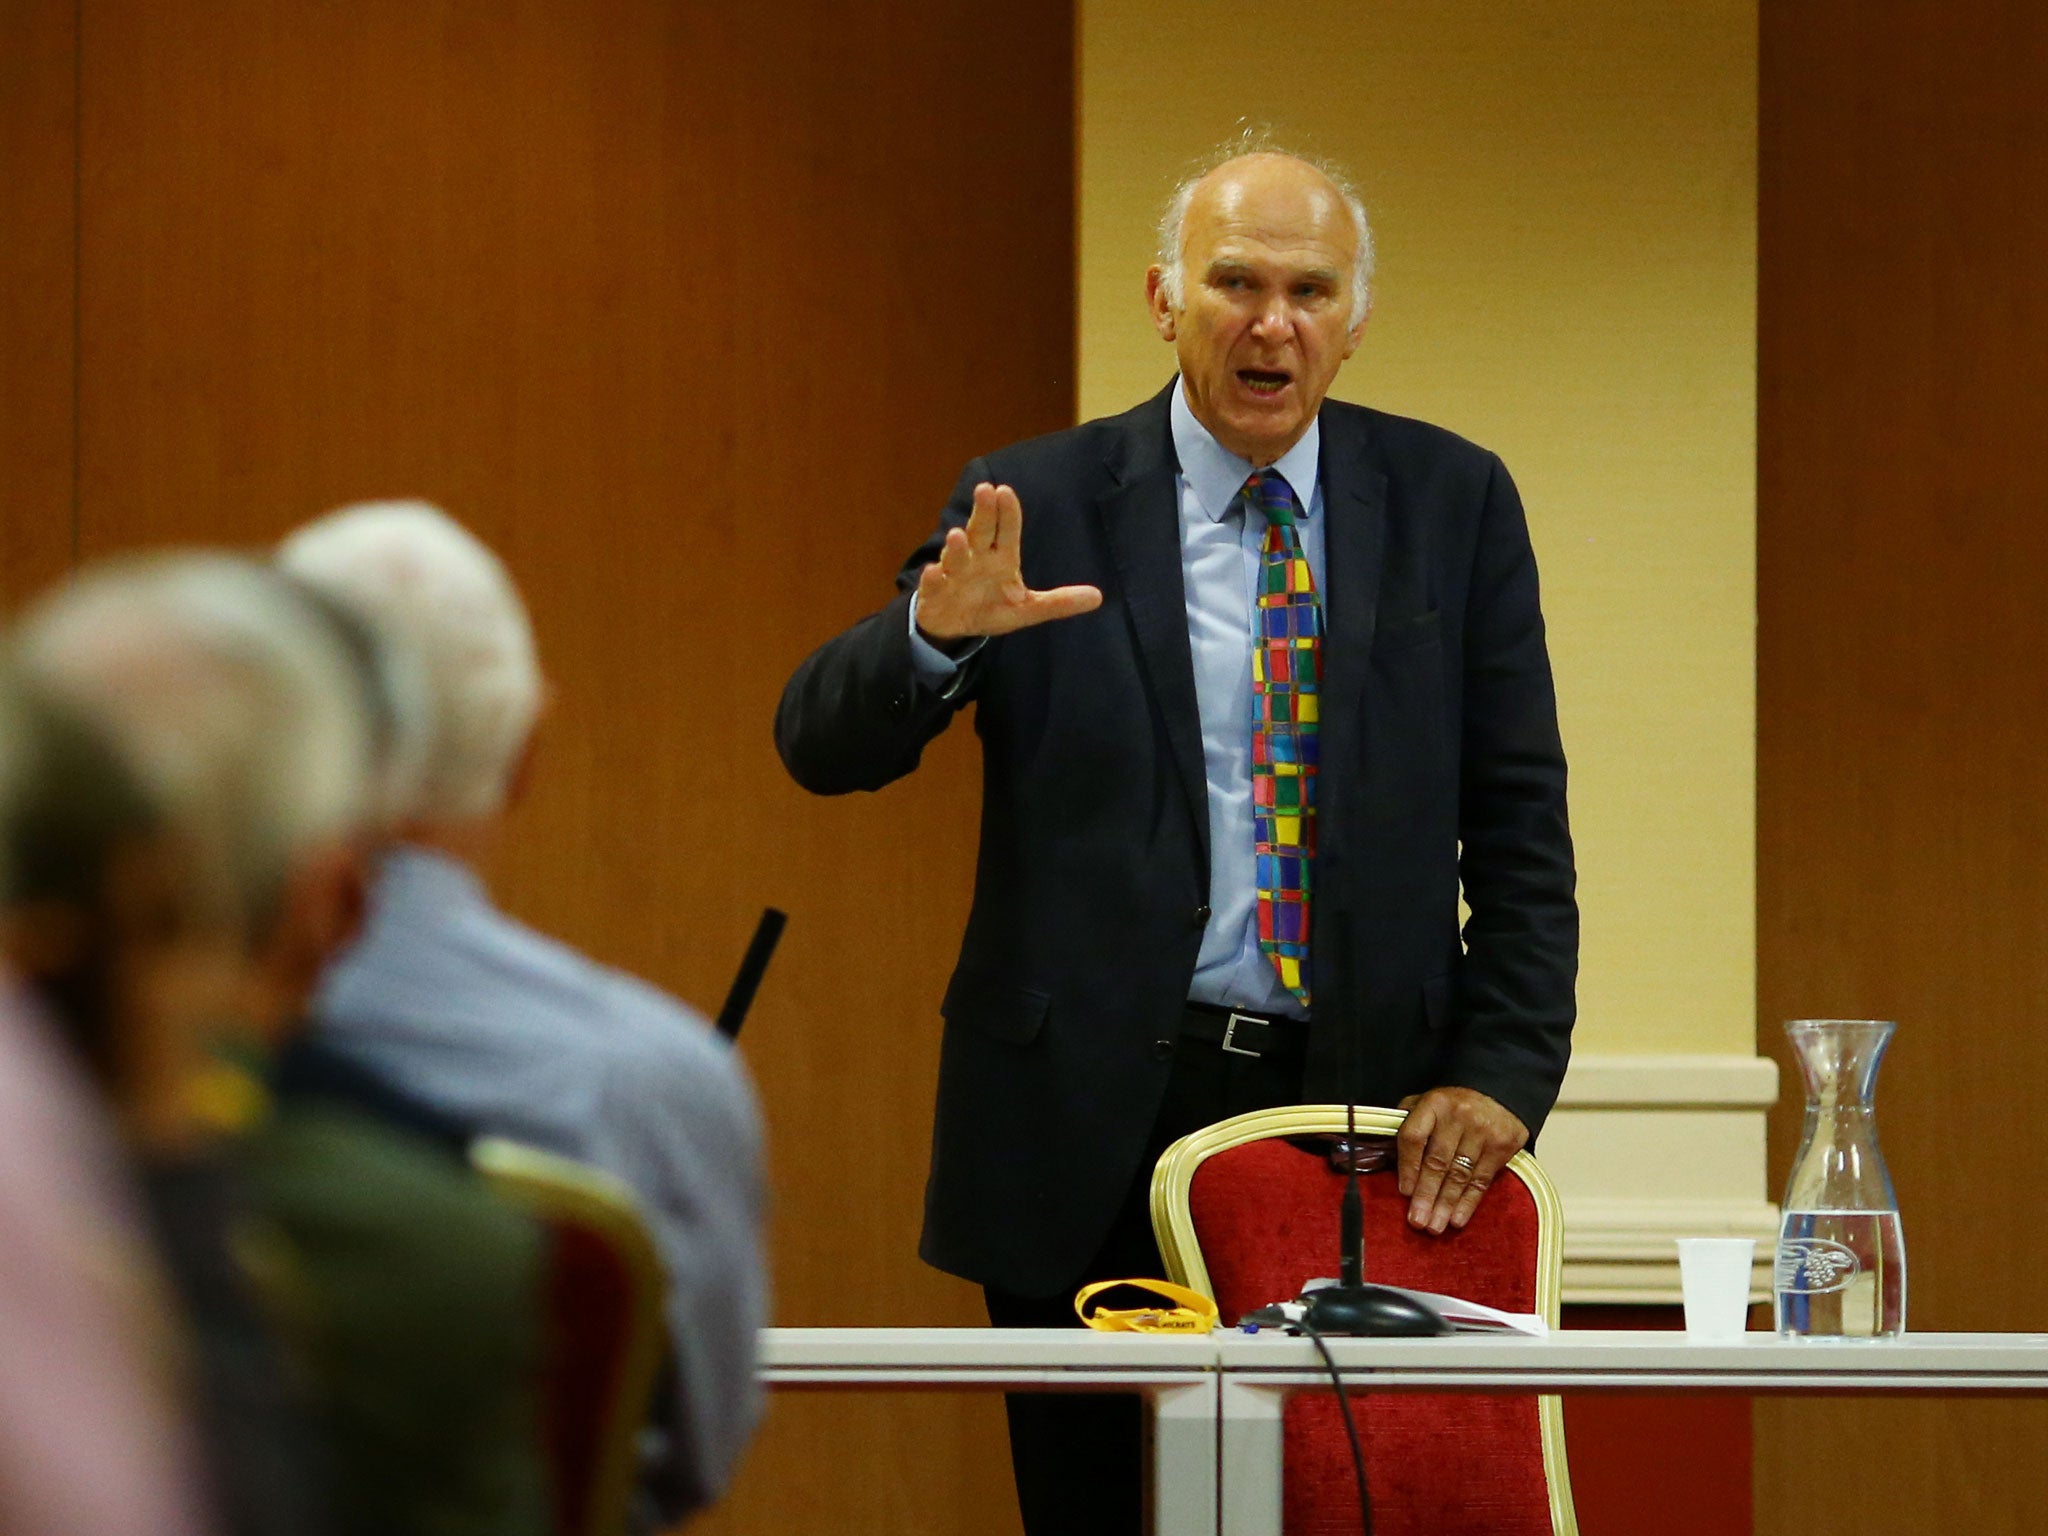 Sir Vince Cable warned that the ‘no deal’ scenario could deliver consequences like the ‘credit crunch’